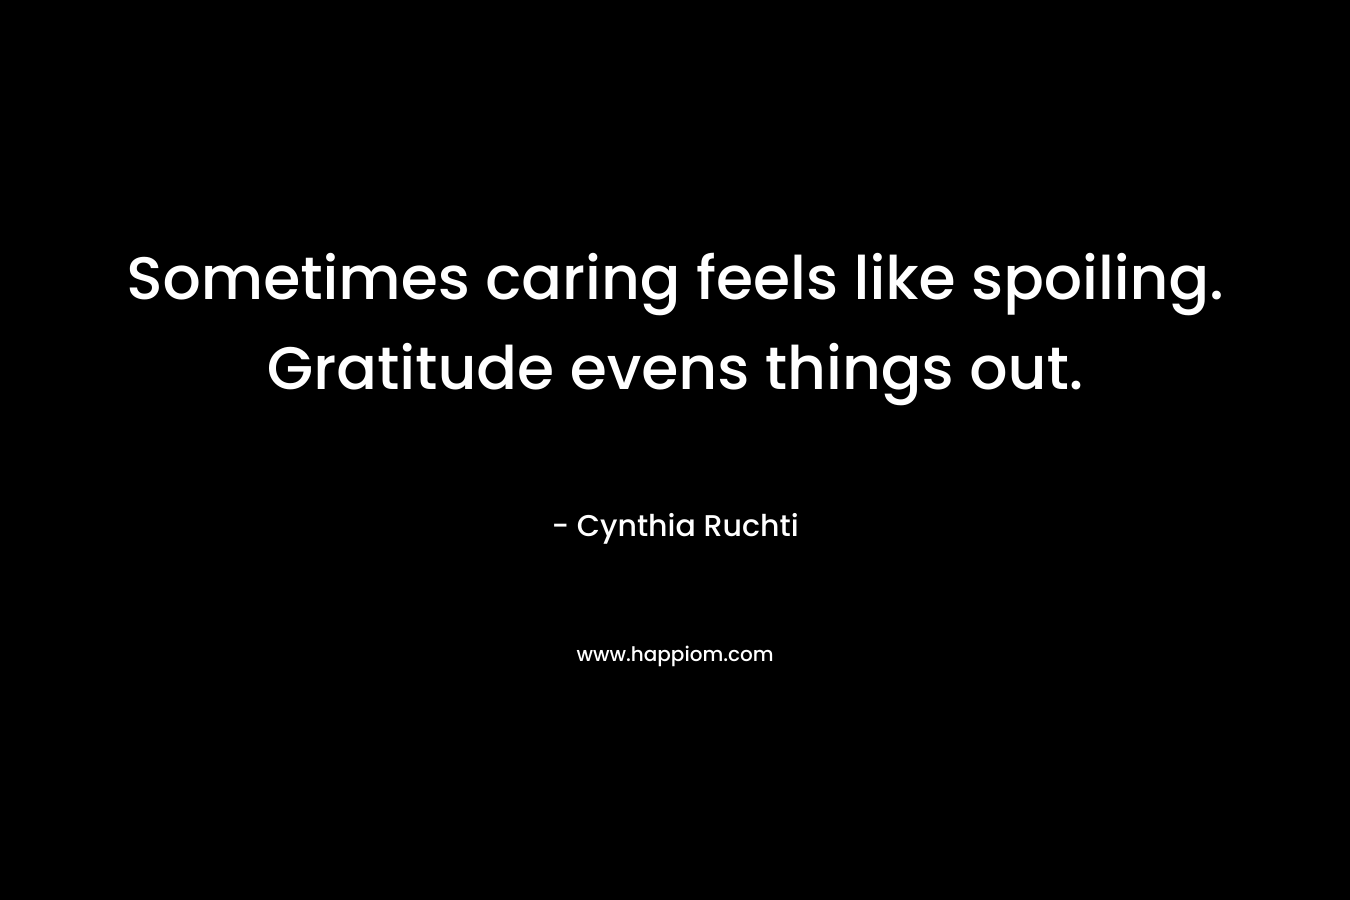 Sometimes caring feels like spoiling. Gratitude evens things out.